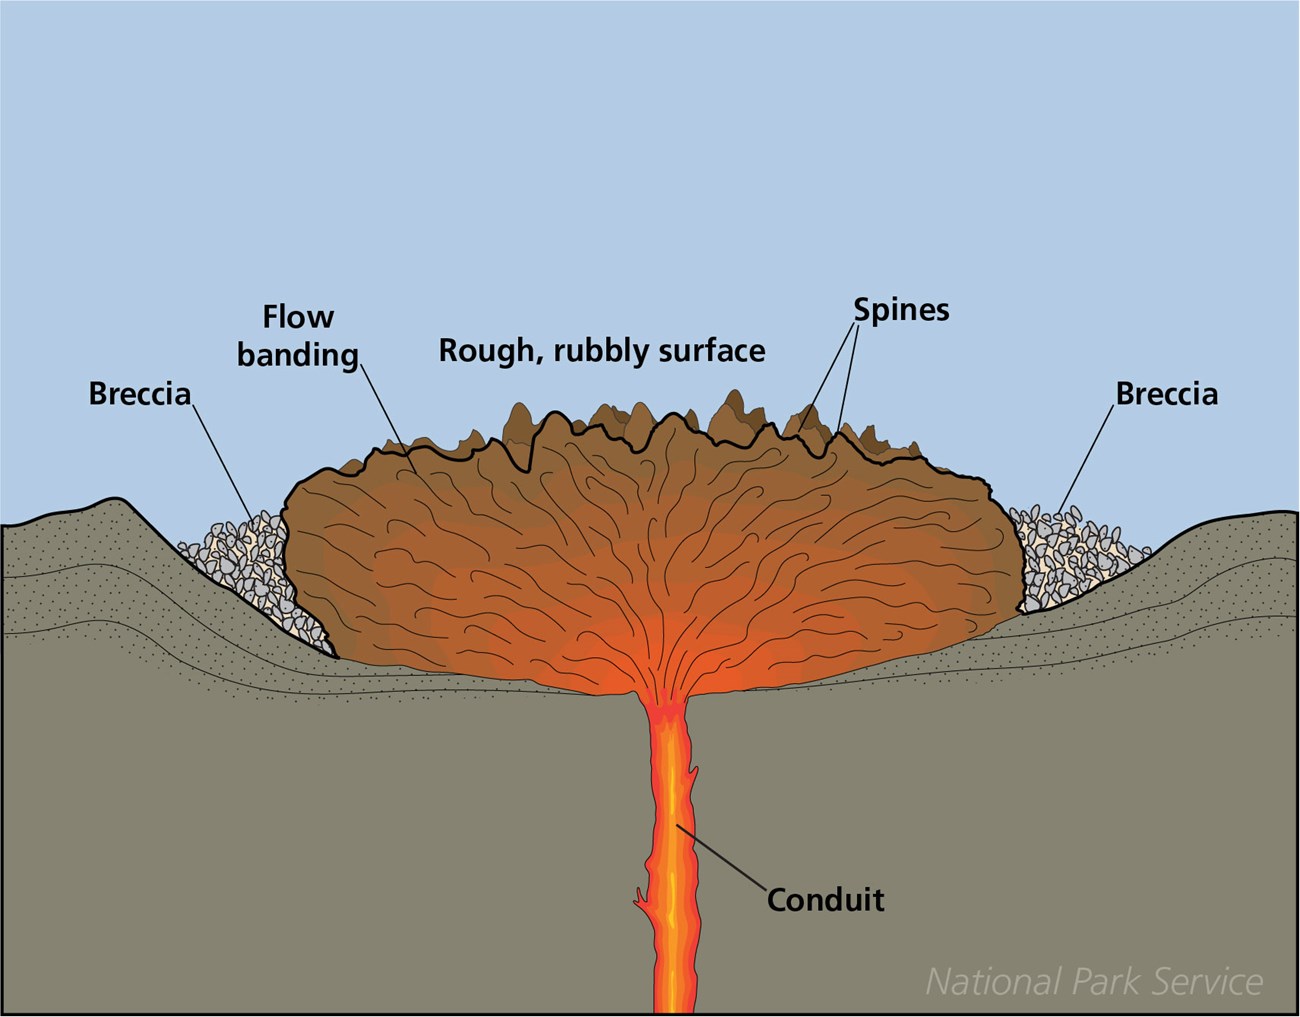 Illustration showing a cut away view of a lava dome and its magma conduit